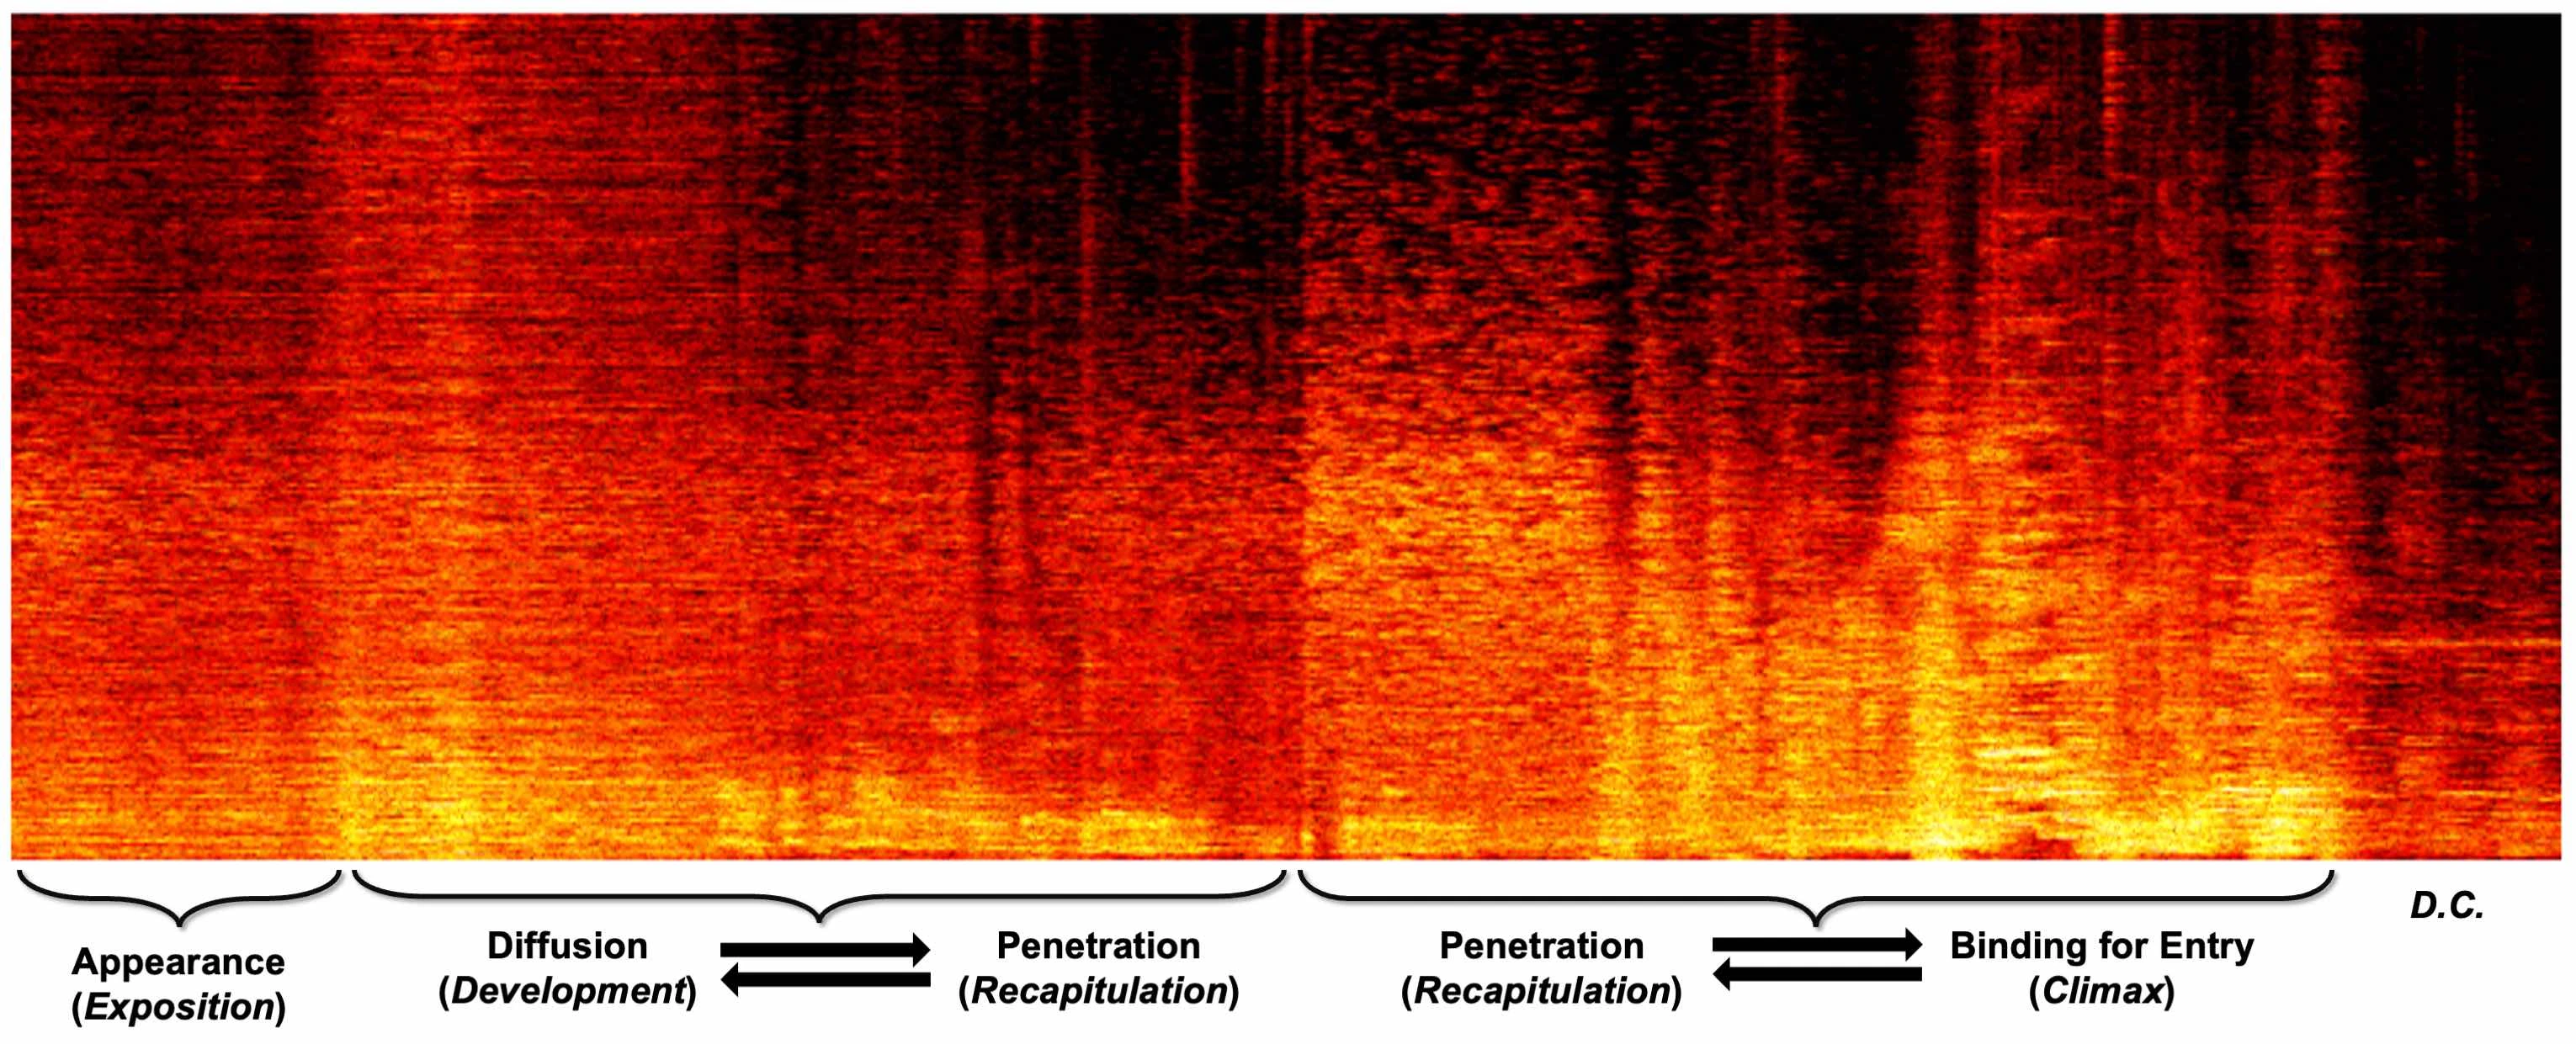 Linear-scale spectrogram of an exemplary narrative over 4 minutes